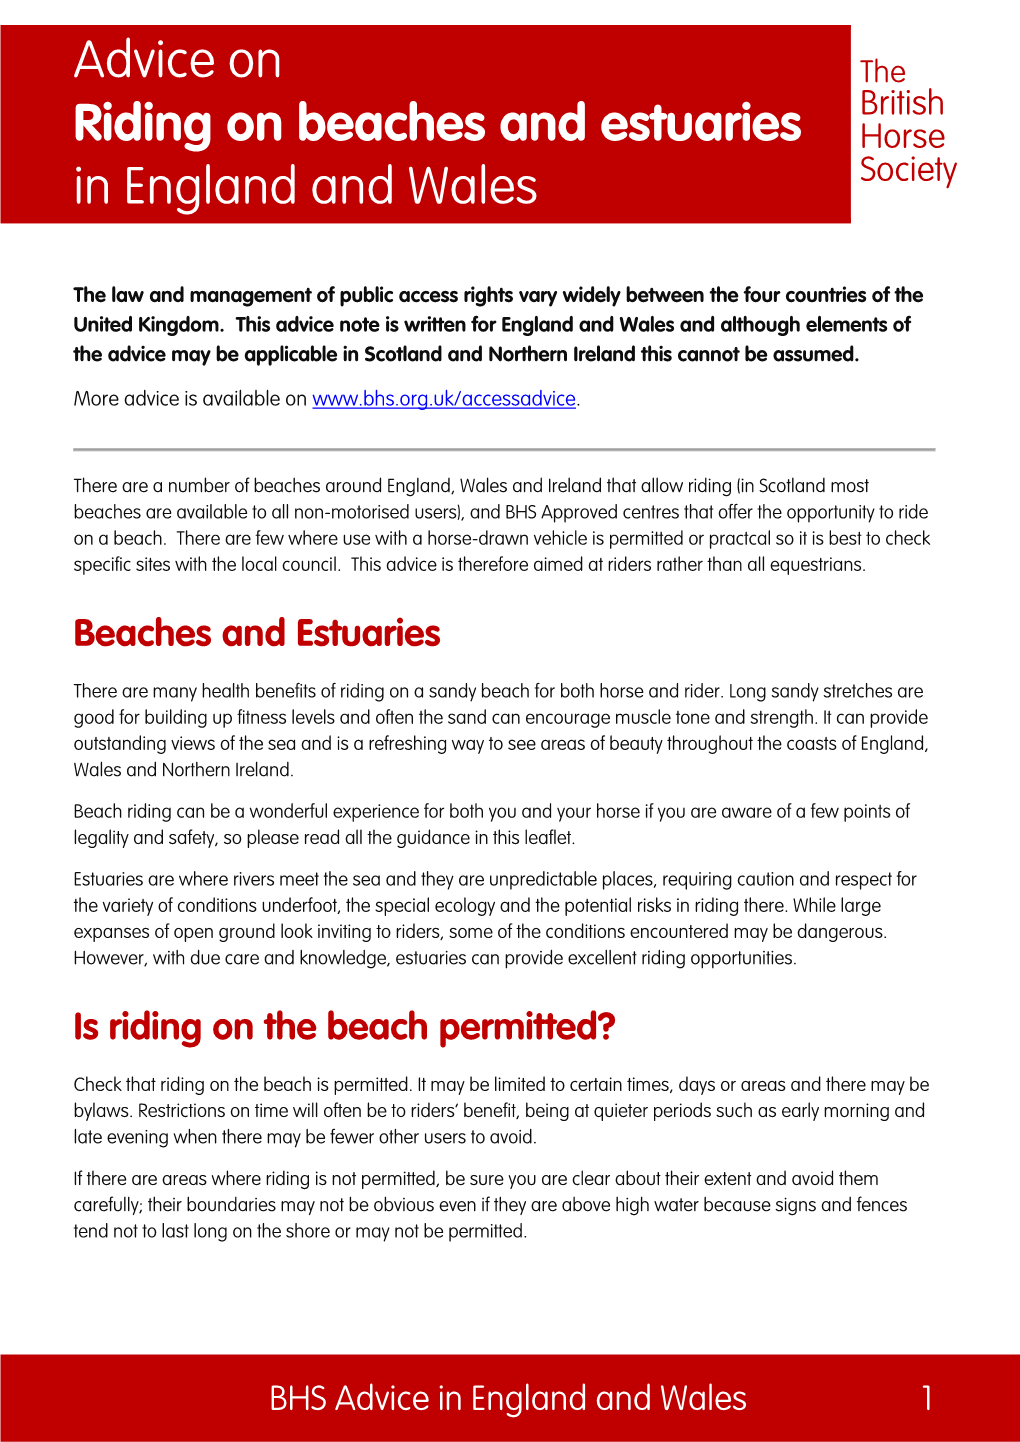 Advice on Riding on Beaches and Estuaries in England and Wales